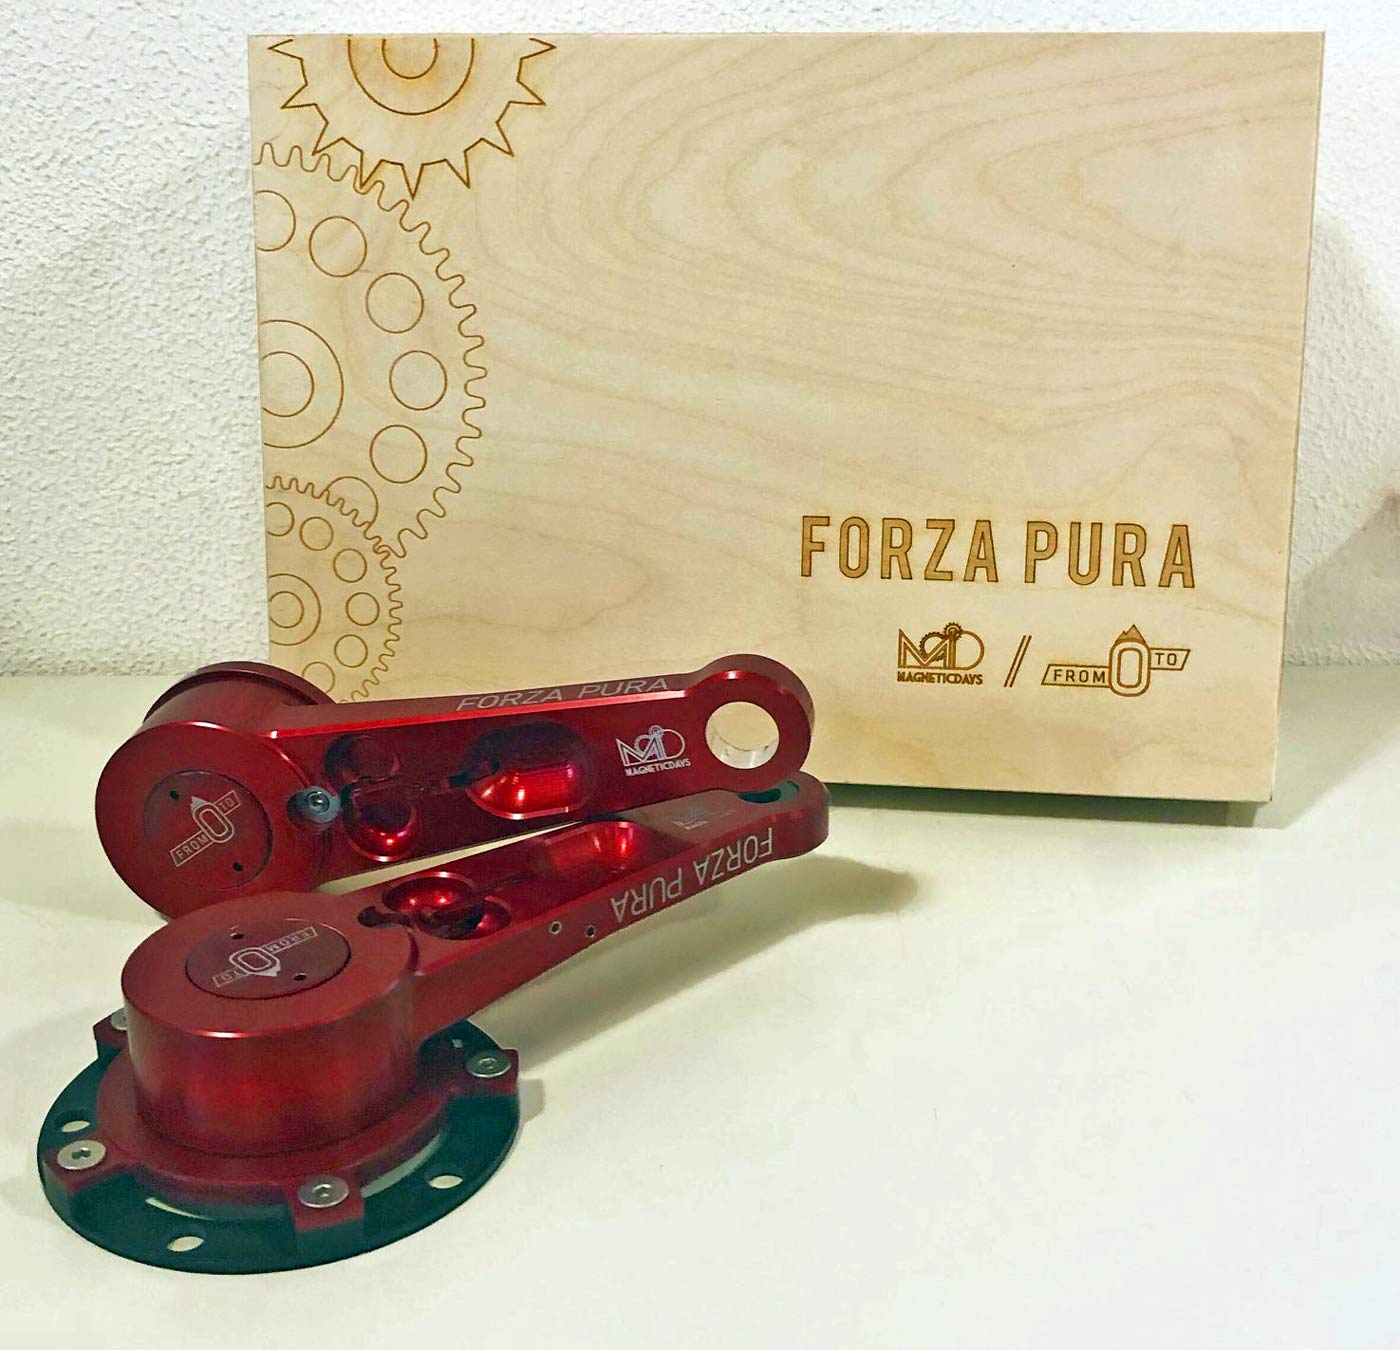 MagneticDays Forza Pura training cranksest, separate spinning crank arms refine pedal stroke and pedal smoothness